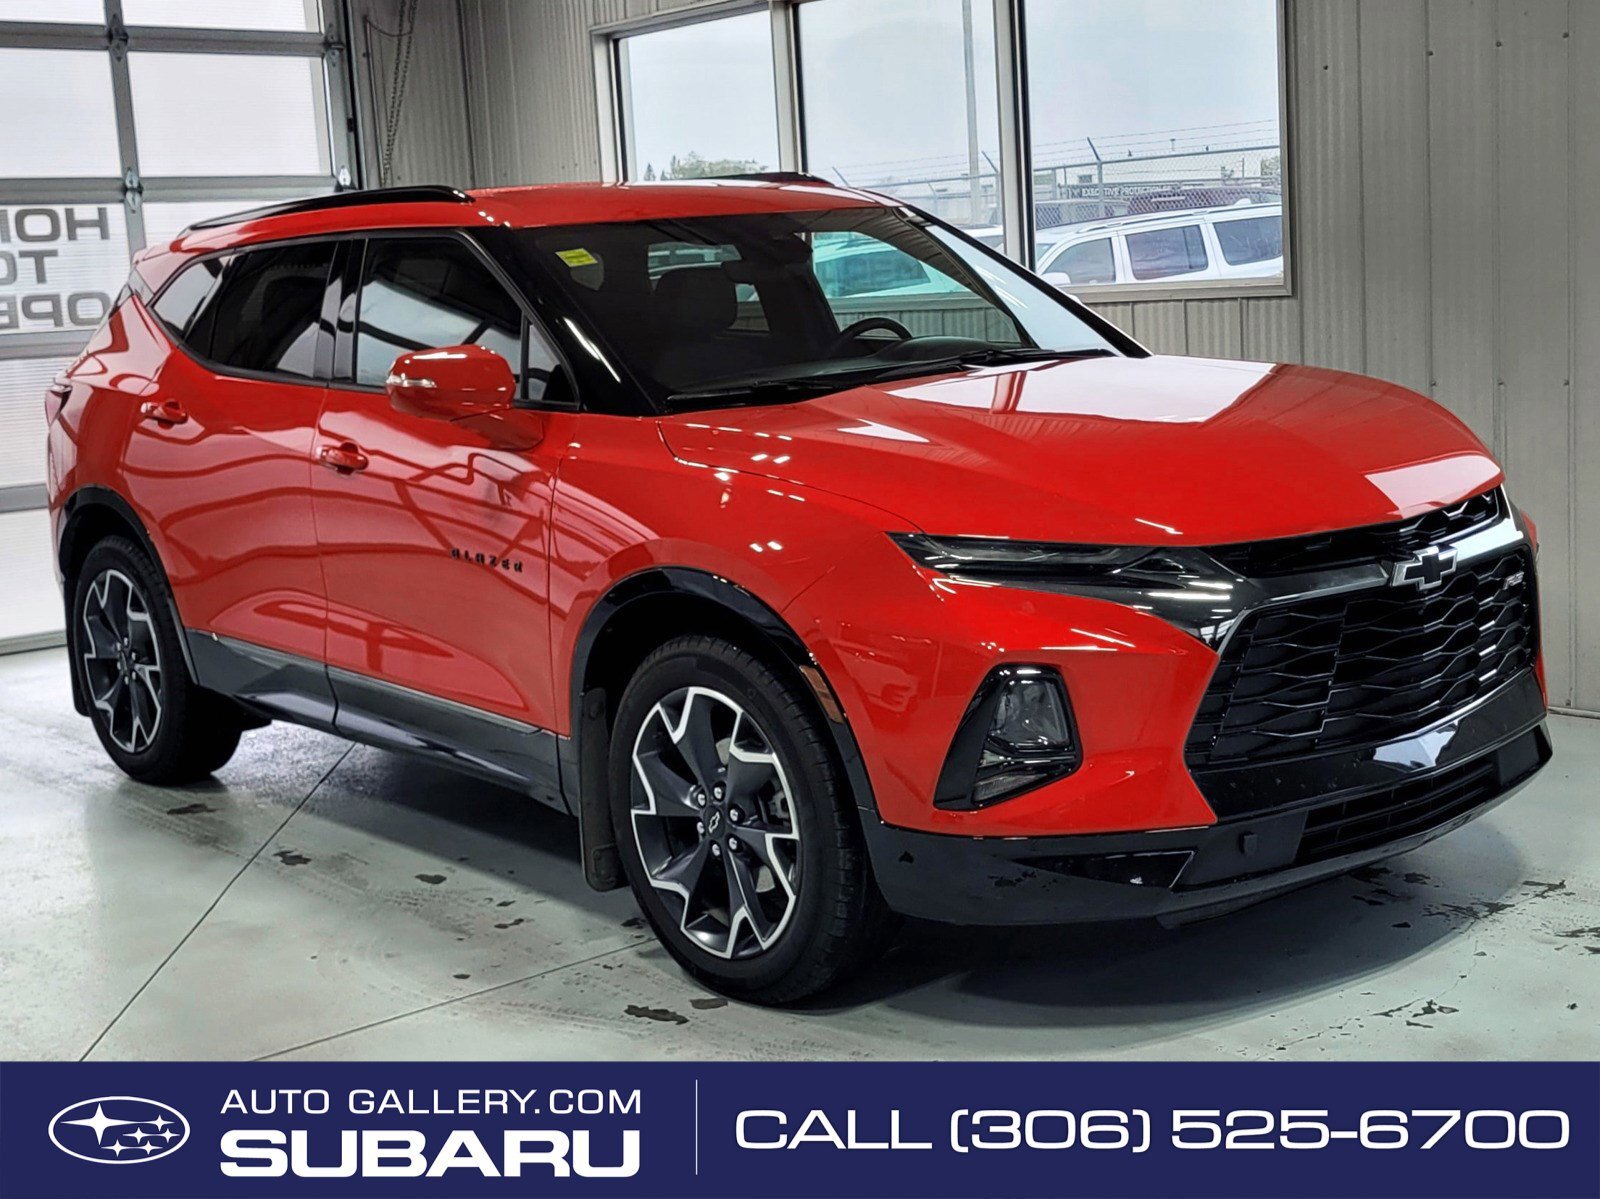 2022 Chevrolet Blazer RS AWD | 308 HP | BOSE AUDIO | HEAT/COOL LEATHER